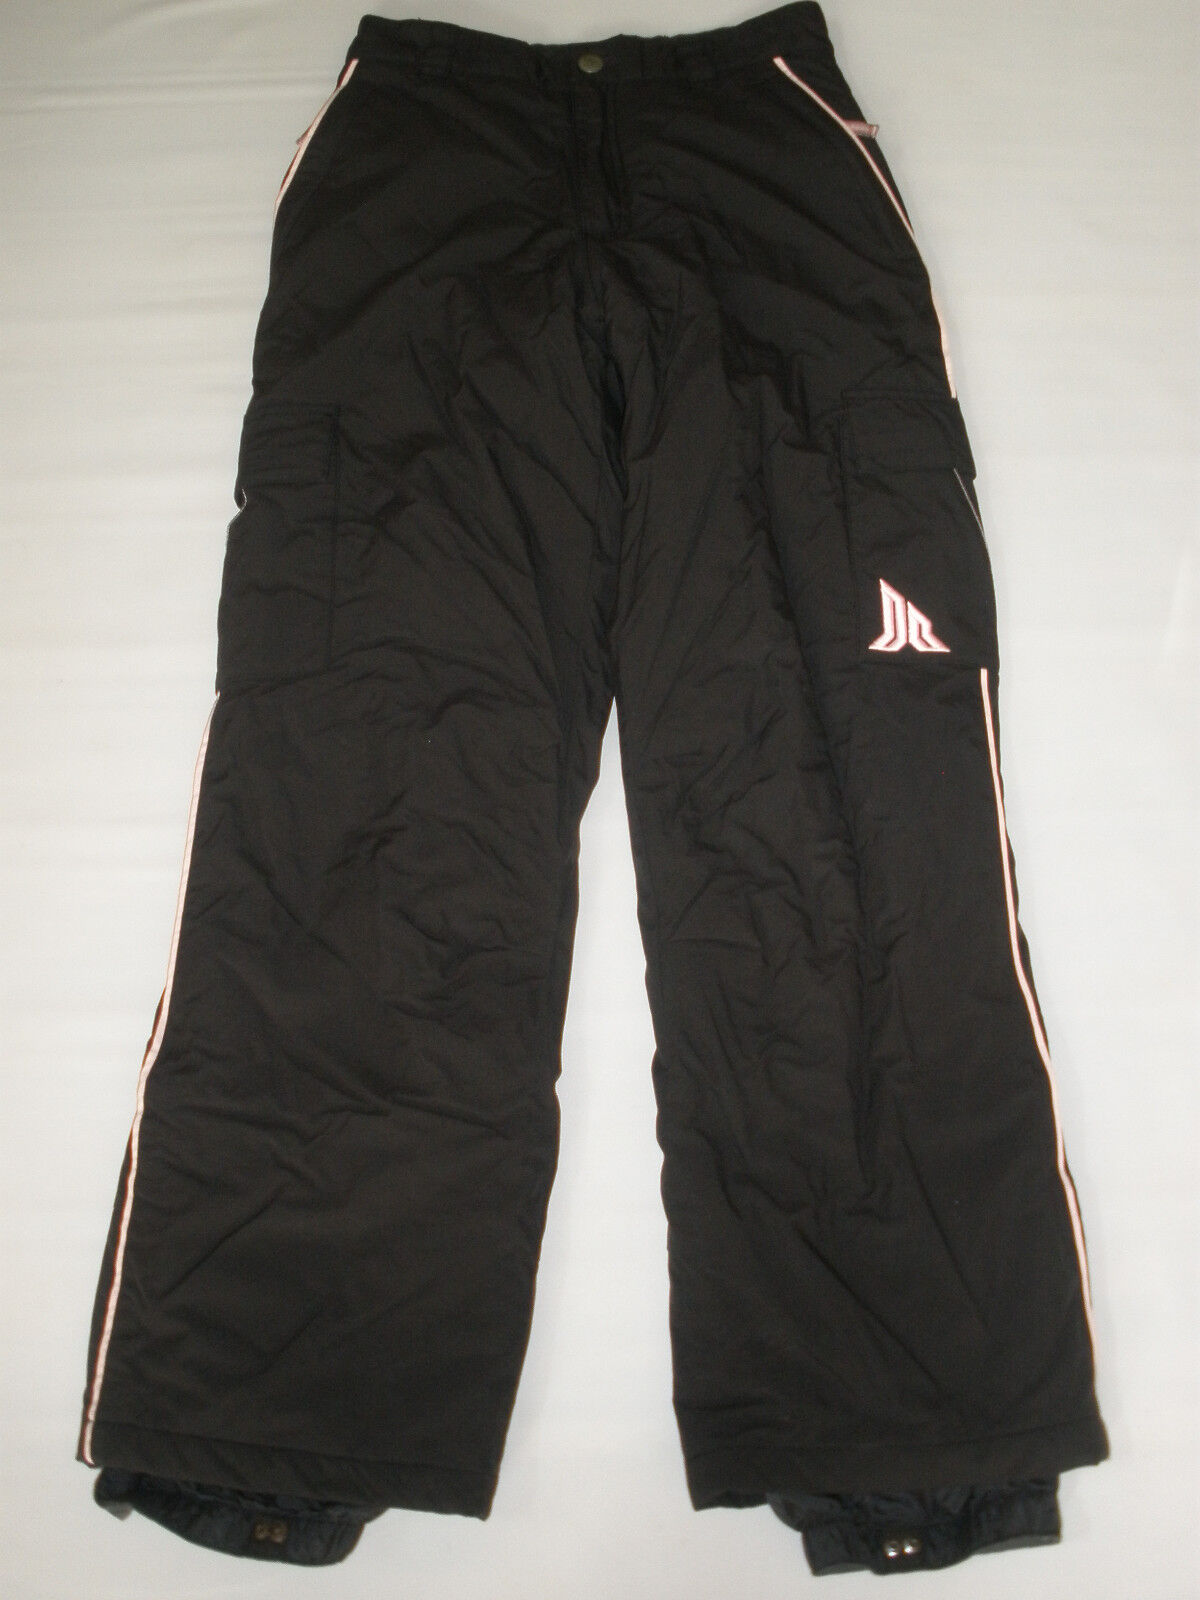 LEGION INSULATED SNOWBOARDING  PANTS  size XS SALE RARE UNIQUE NEW NICE